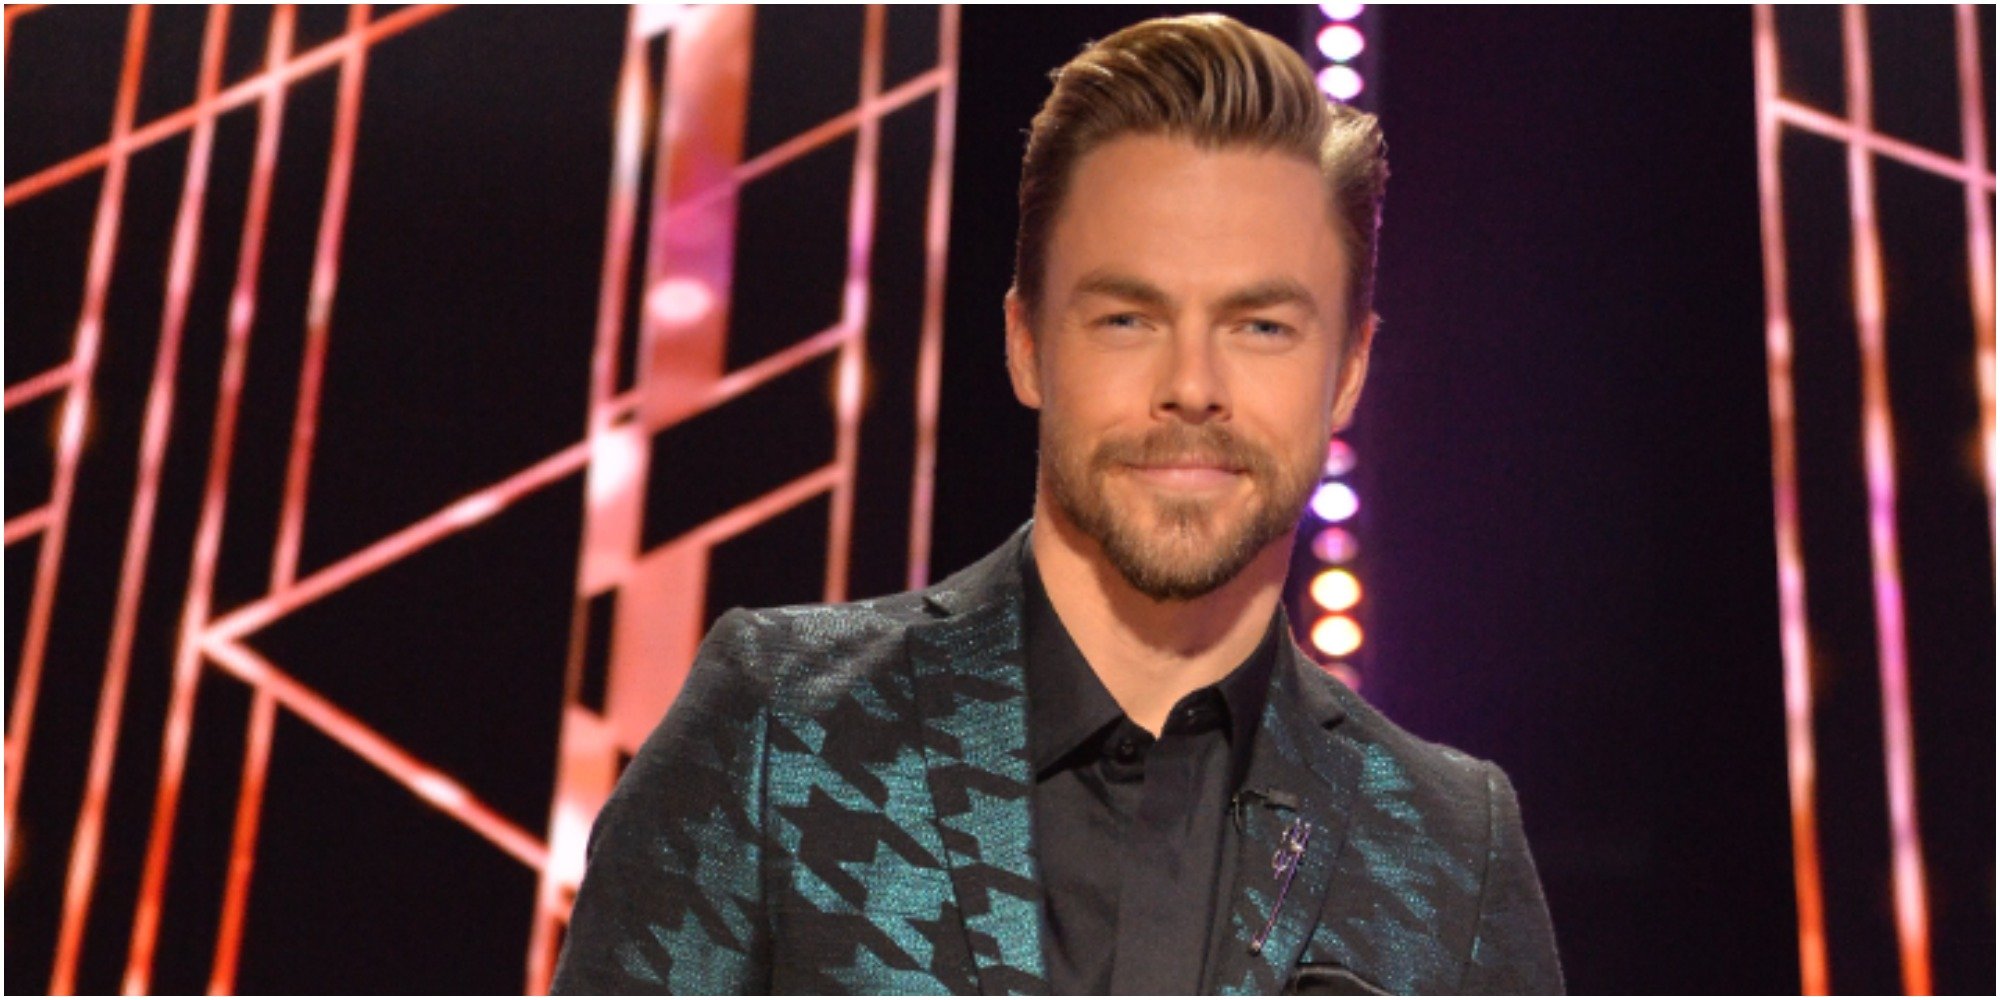 Derek Hough is seated on the set of "Dancing with the Stars."